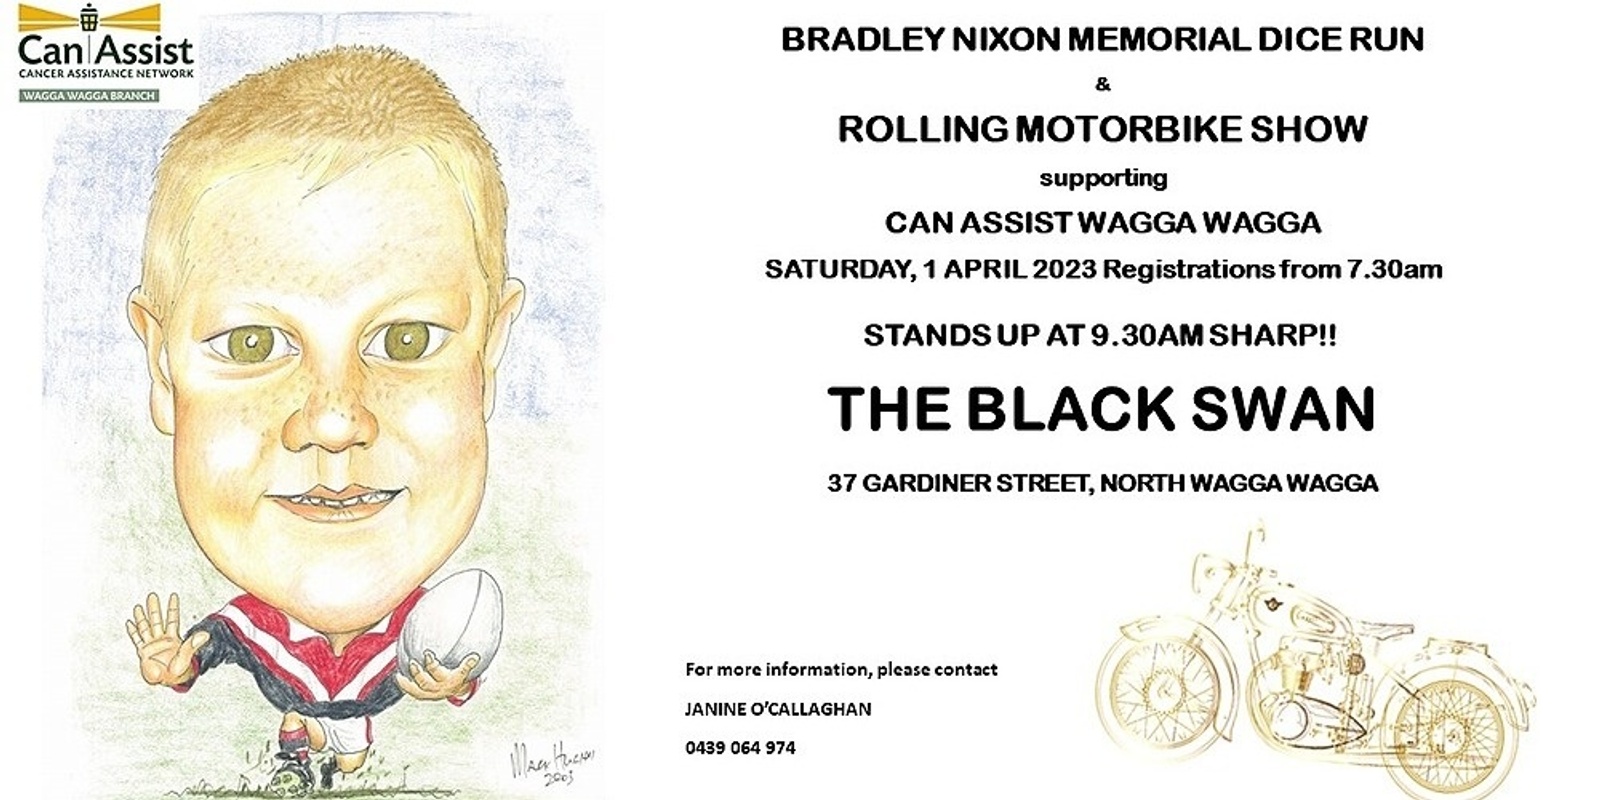 2023 Bradley Nixon Memorial Motorcycle Dice Run & Publican's Choice Motorbike Show supporting Can Assist Wagga Wagga